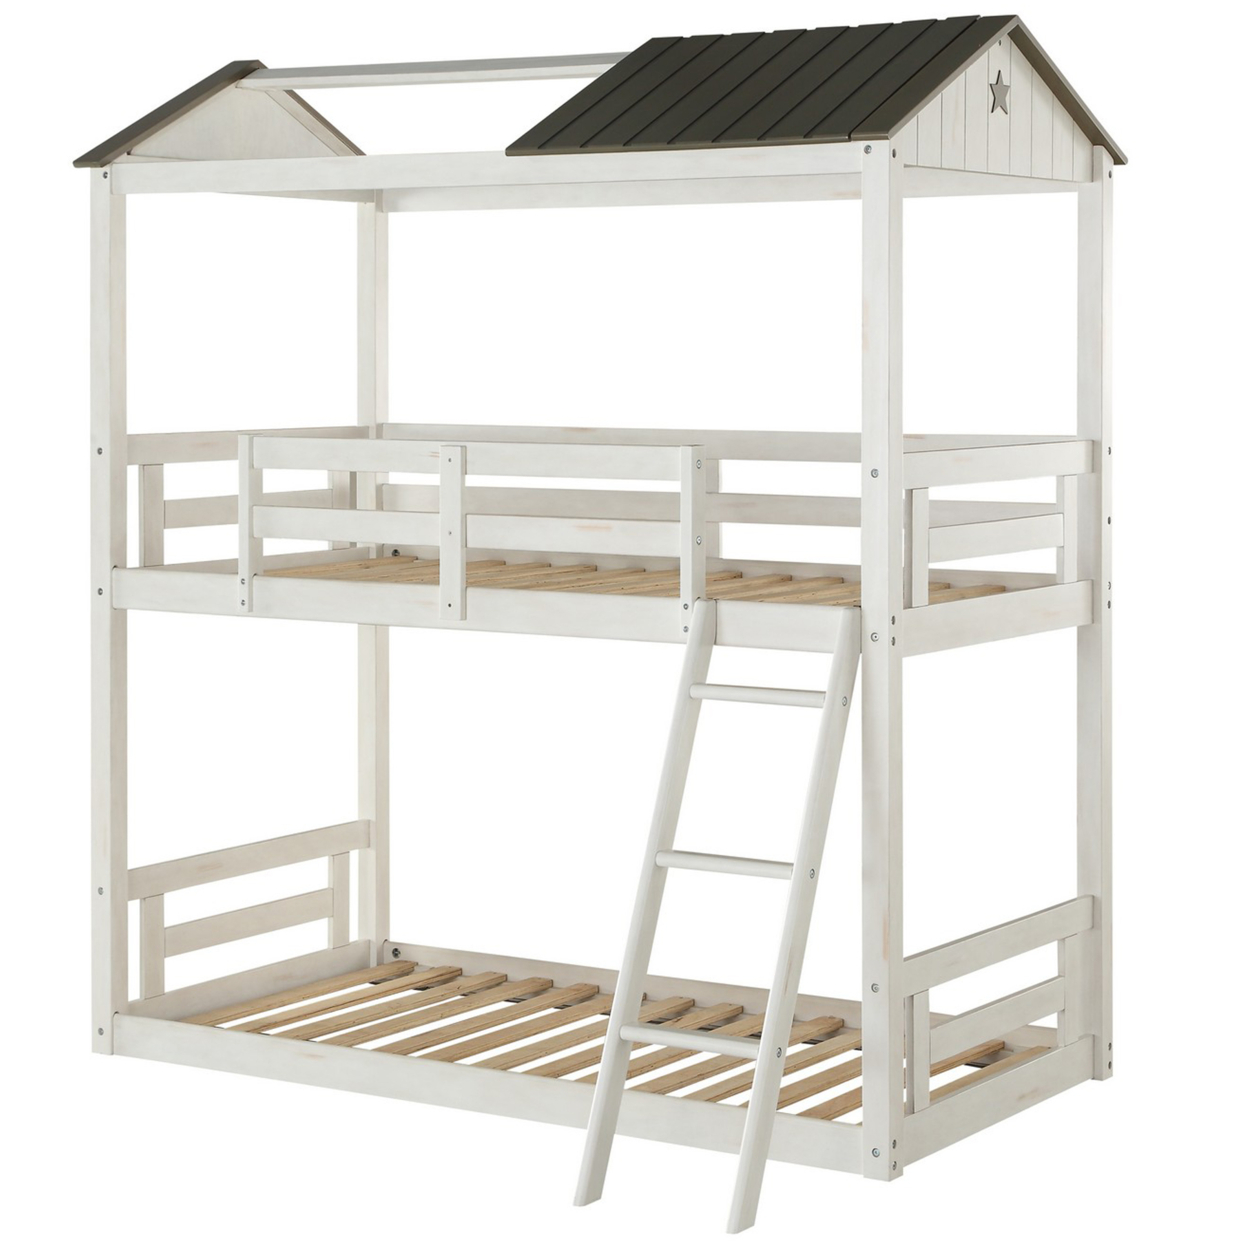 Wooden Twin Size Bunk Bed With Hut Design, White And Gray- Saltoro Sherpi